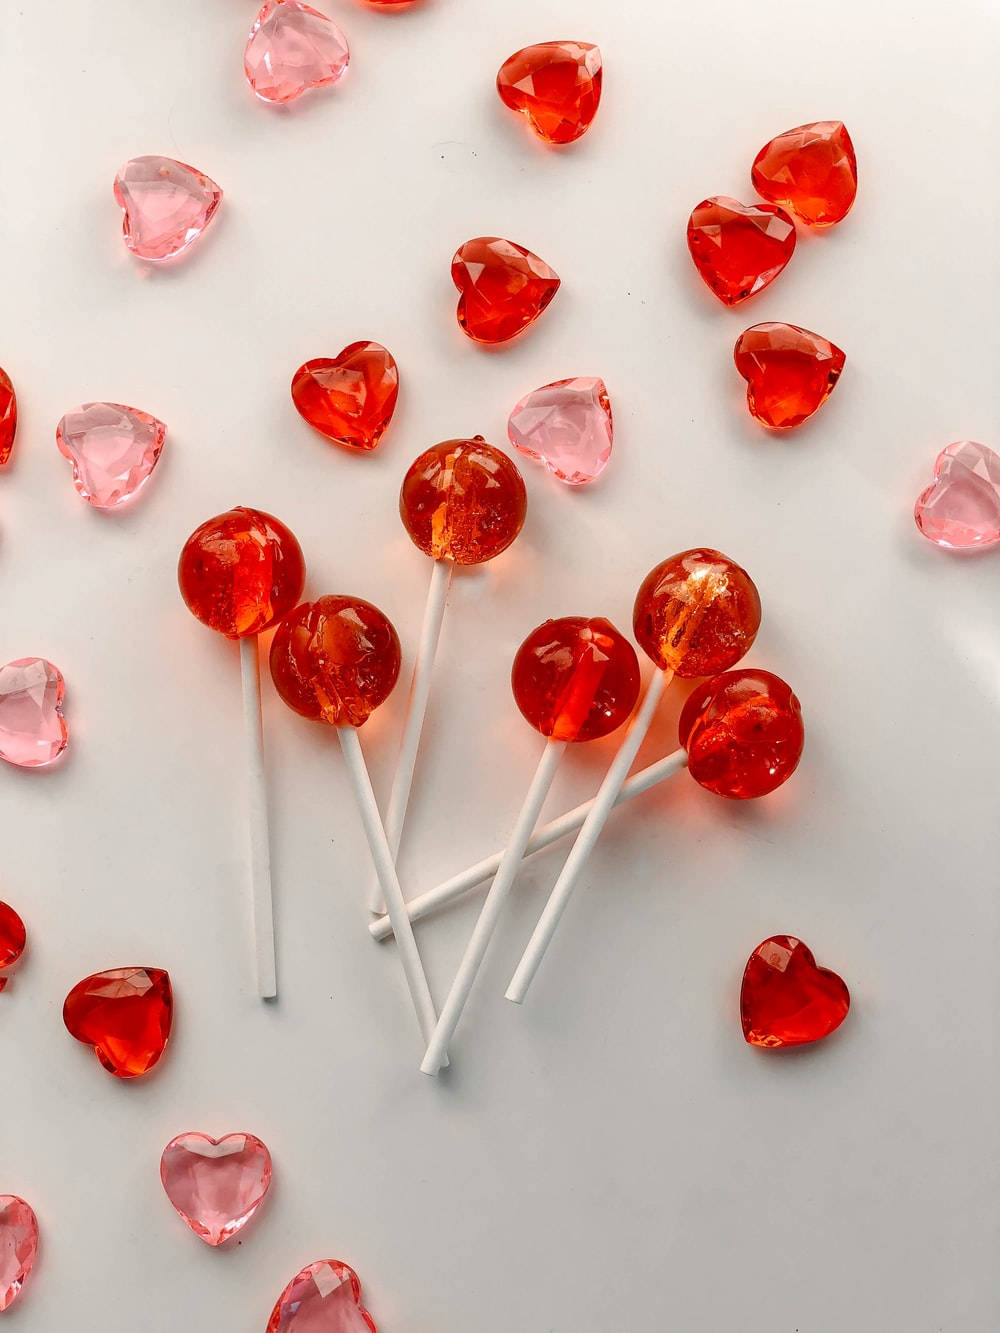 Heart Aesthetic Crystals And Lollipops Background